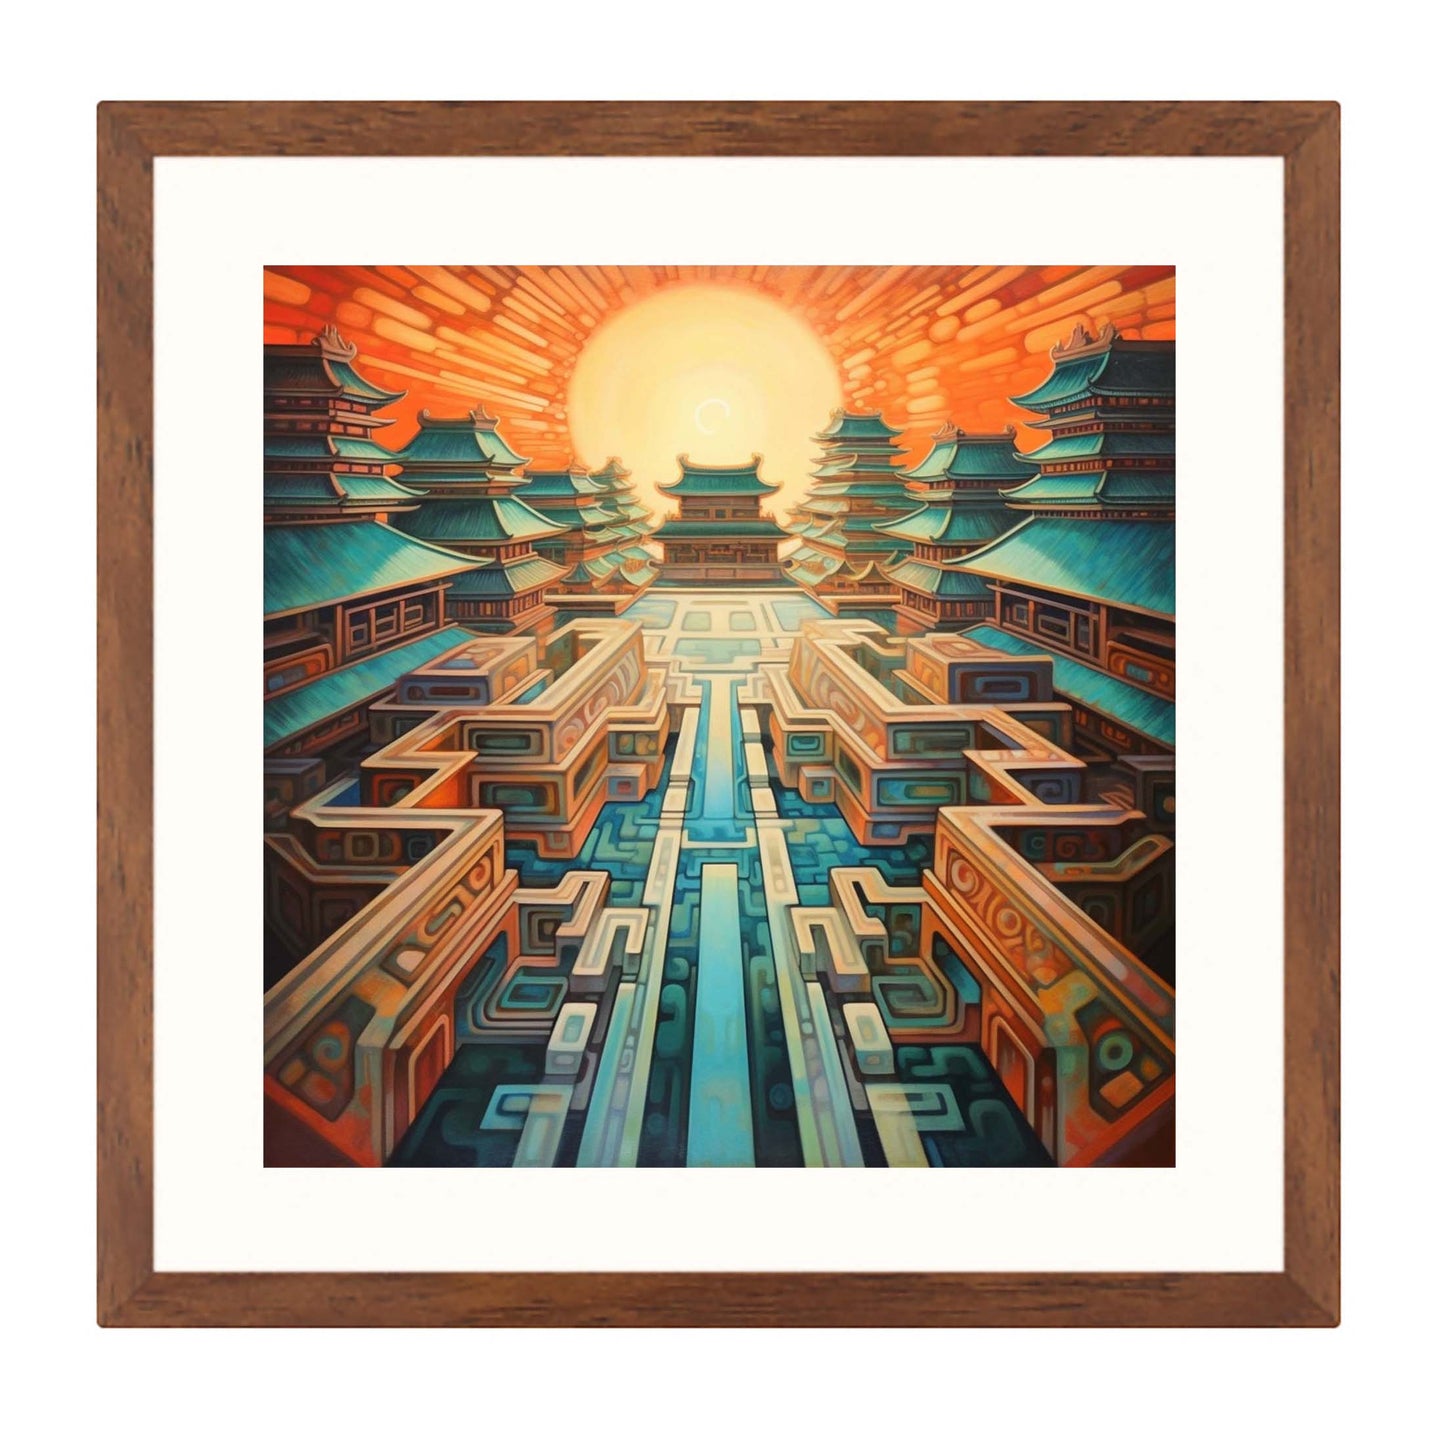 Beijing Forbidden City - mural in the style of futurism